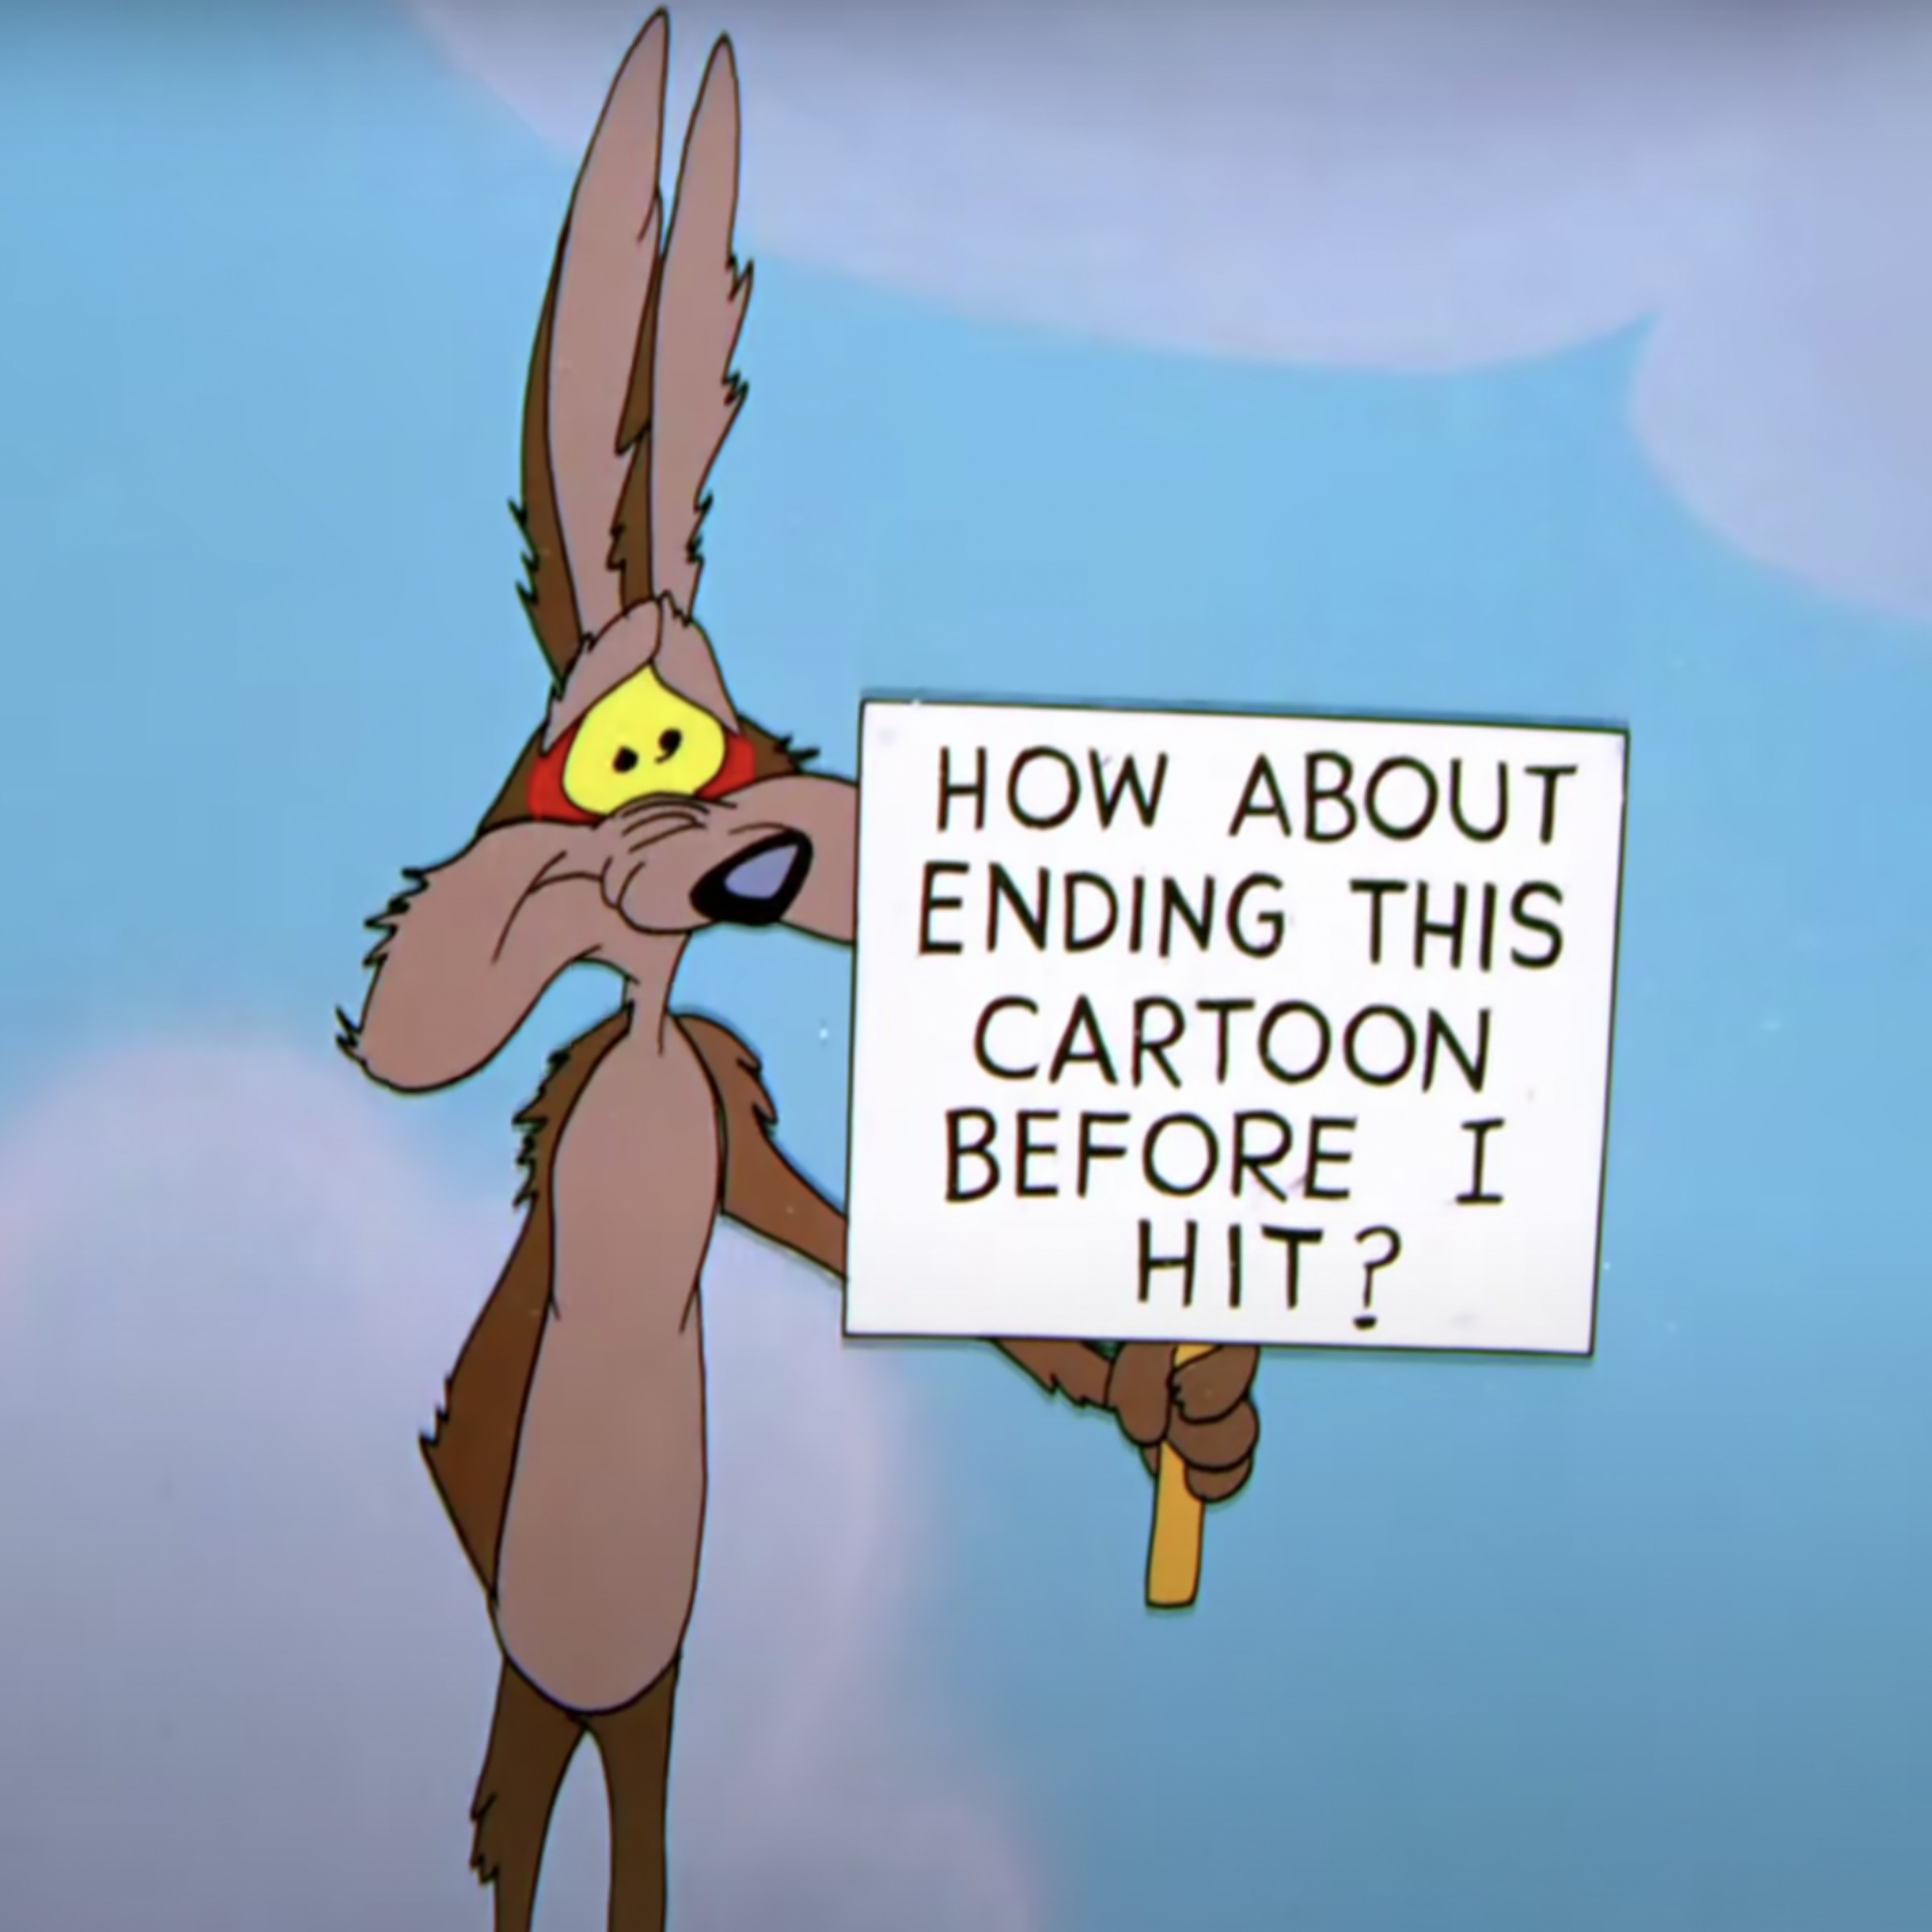 An image showing Wile E. Coyote